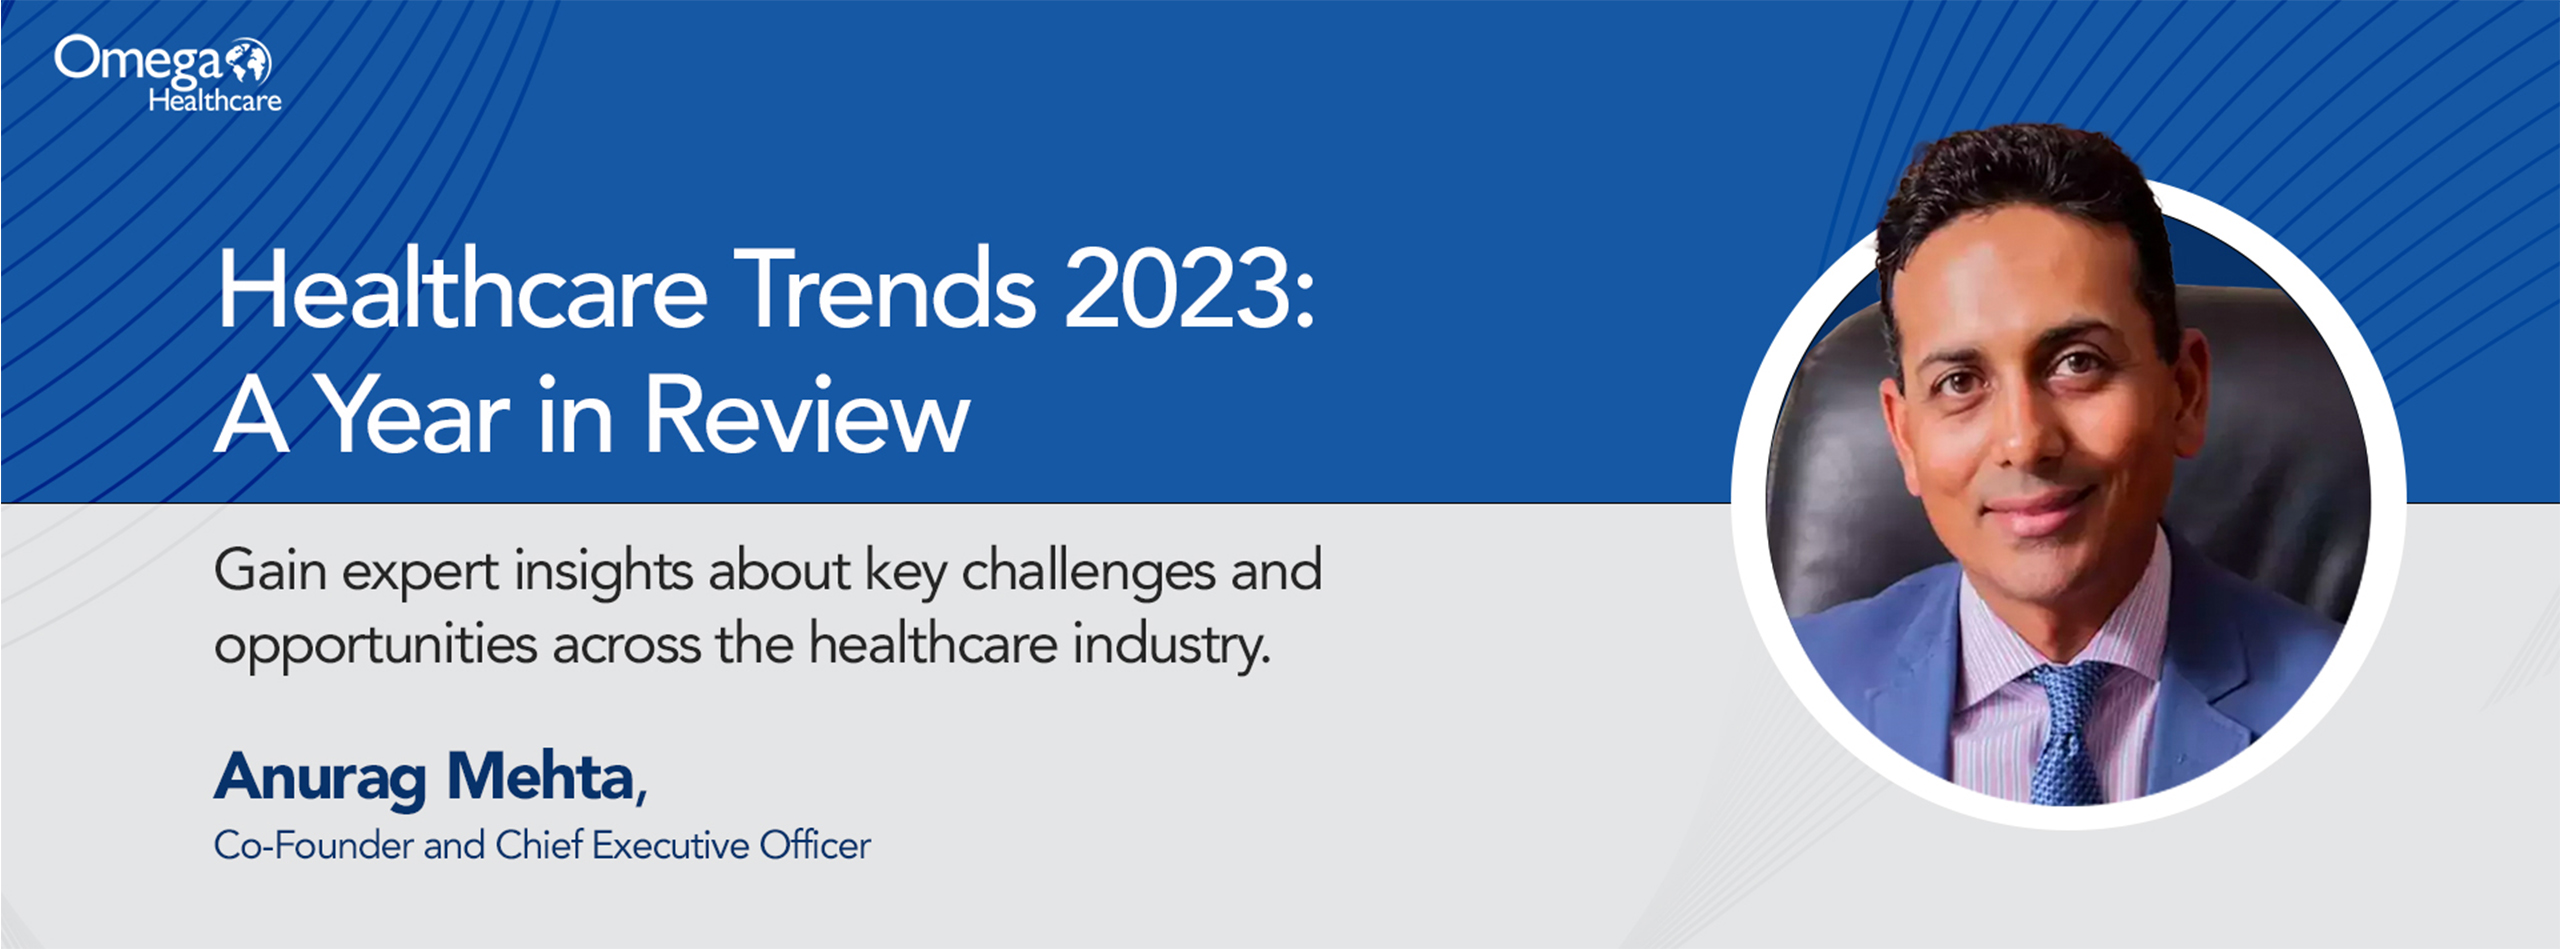 Healthcare Trends 2023 A Year in Review